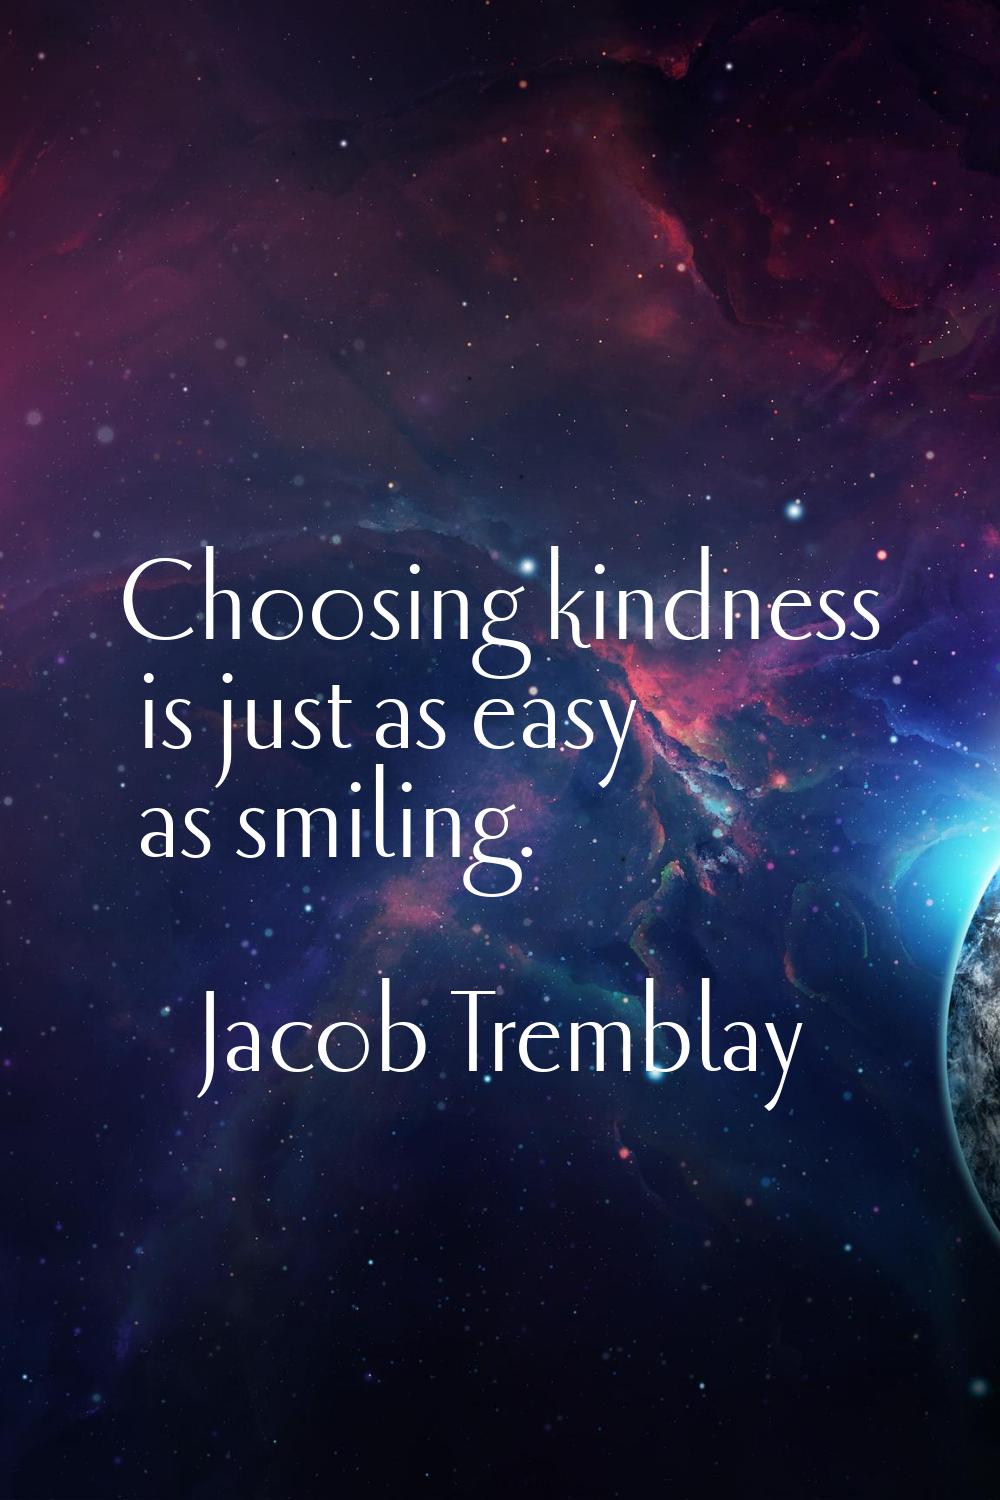 Choosing kindness is just as easy as smiling.